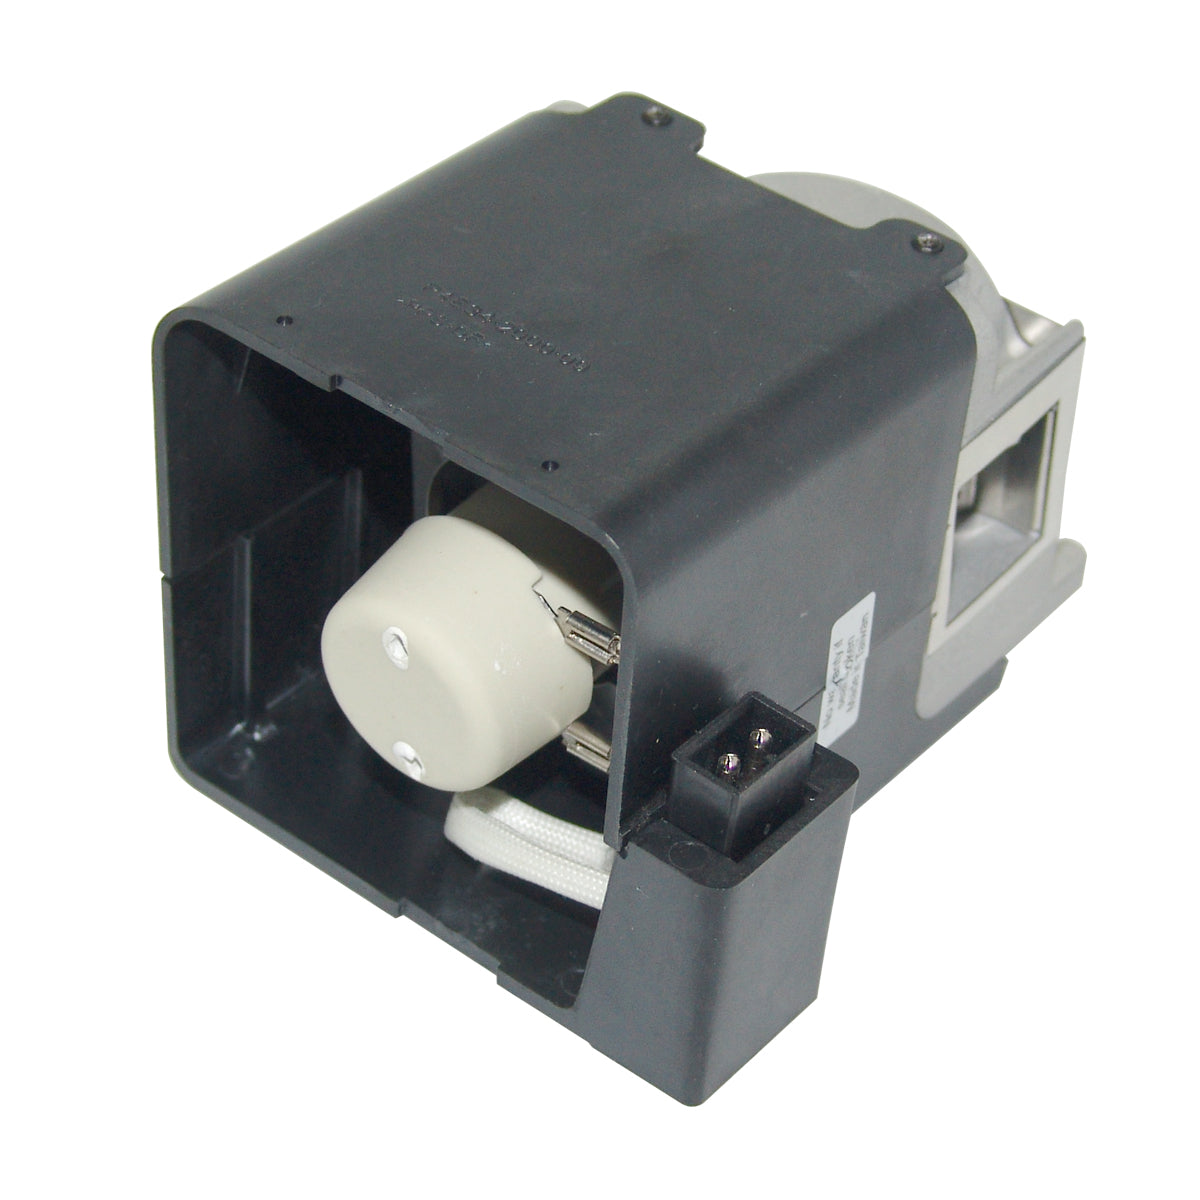 Philips 9144 000 00595 Philips Projector Lamp Module